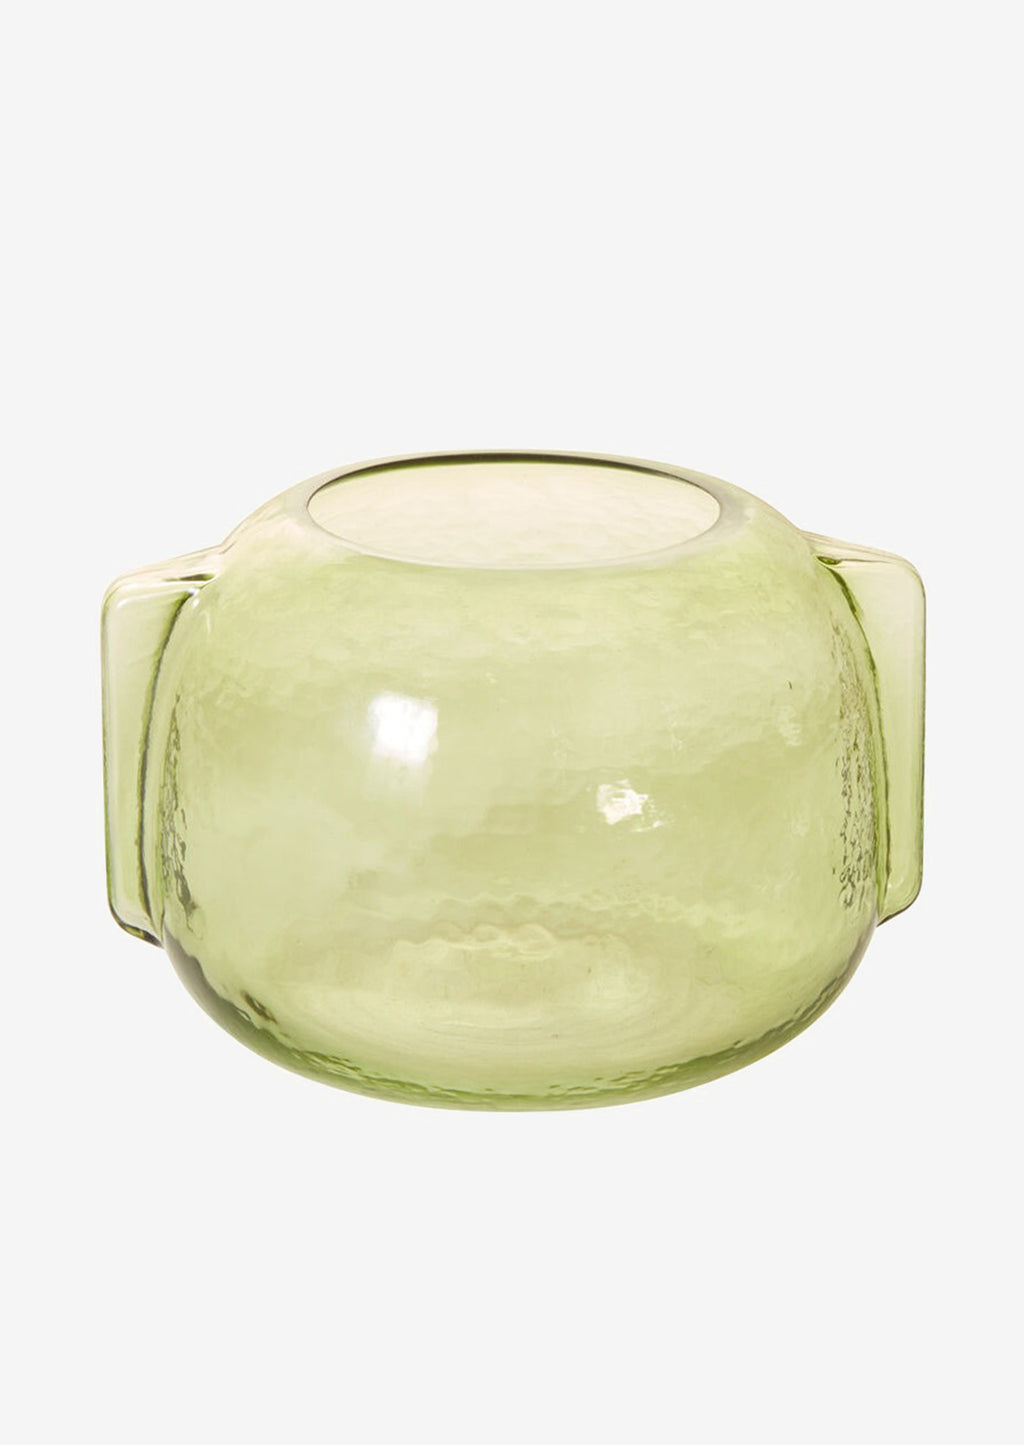 4: A transparent green glass vase in short/wide shape with side handle detail.